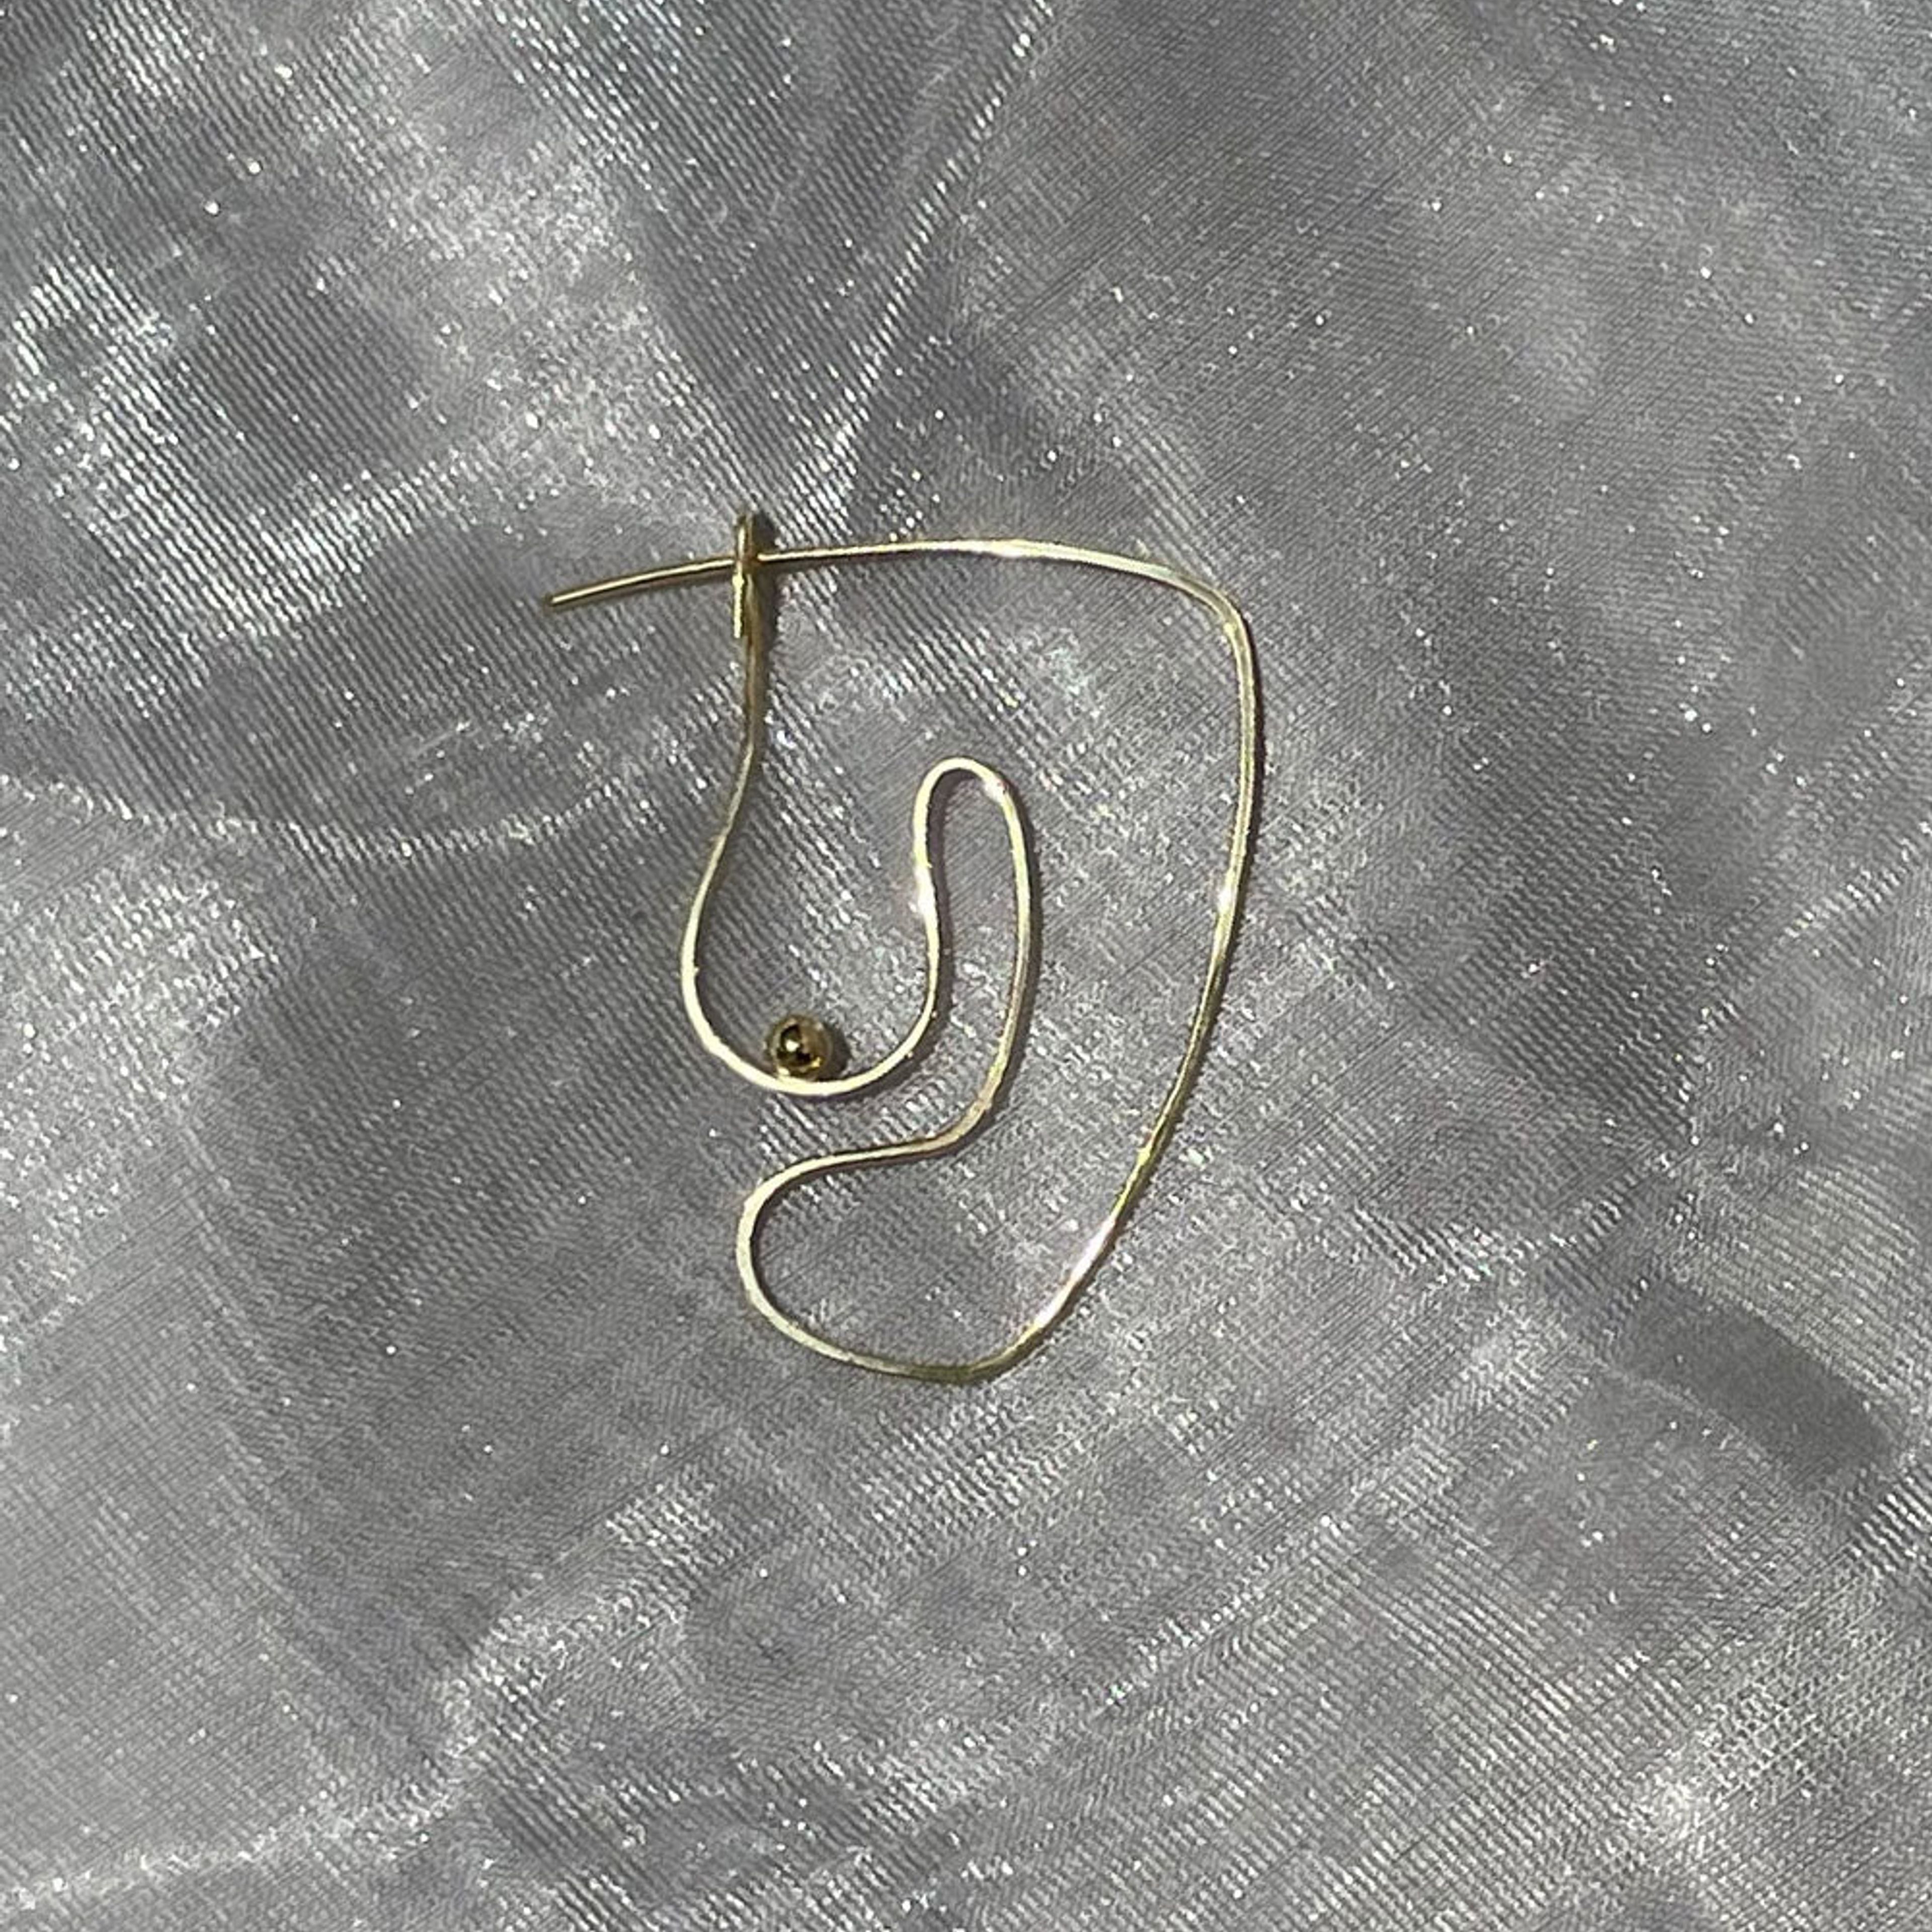 Deconstructed Nude Earring